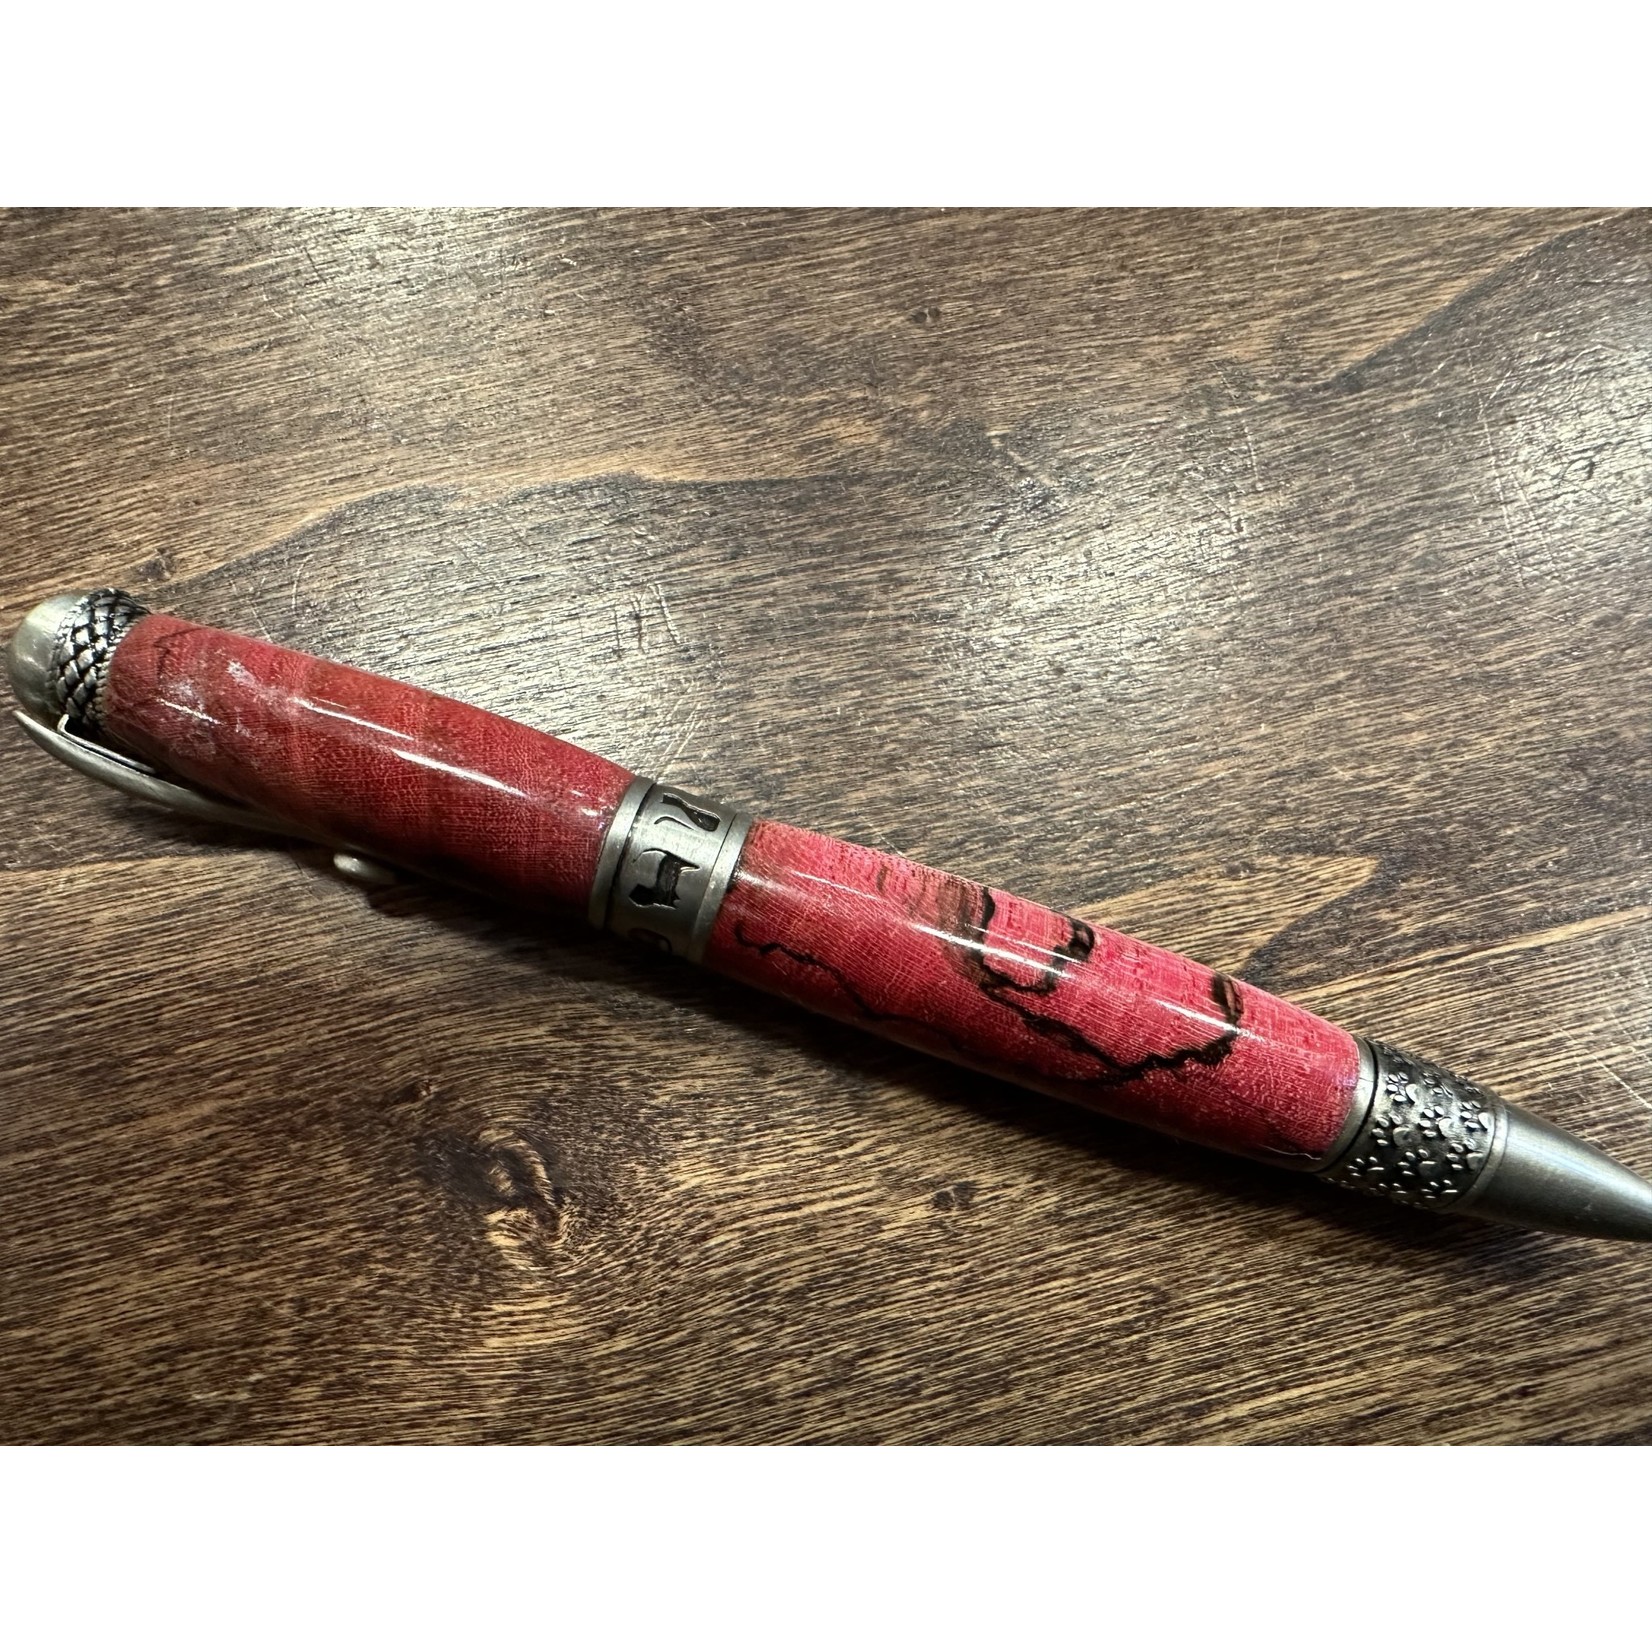 Rick Bennett Chisel and Lathe l #10a Cat Paw Pen- Red dyed marble burg